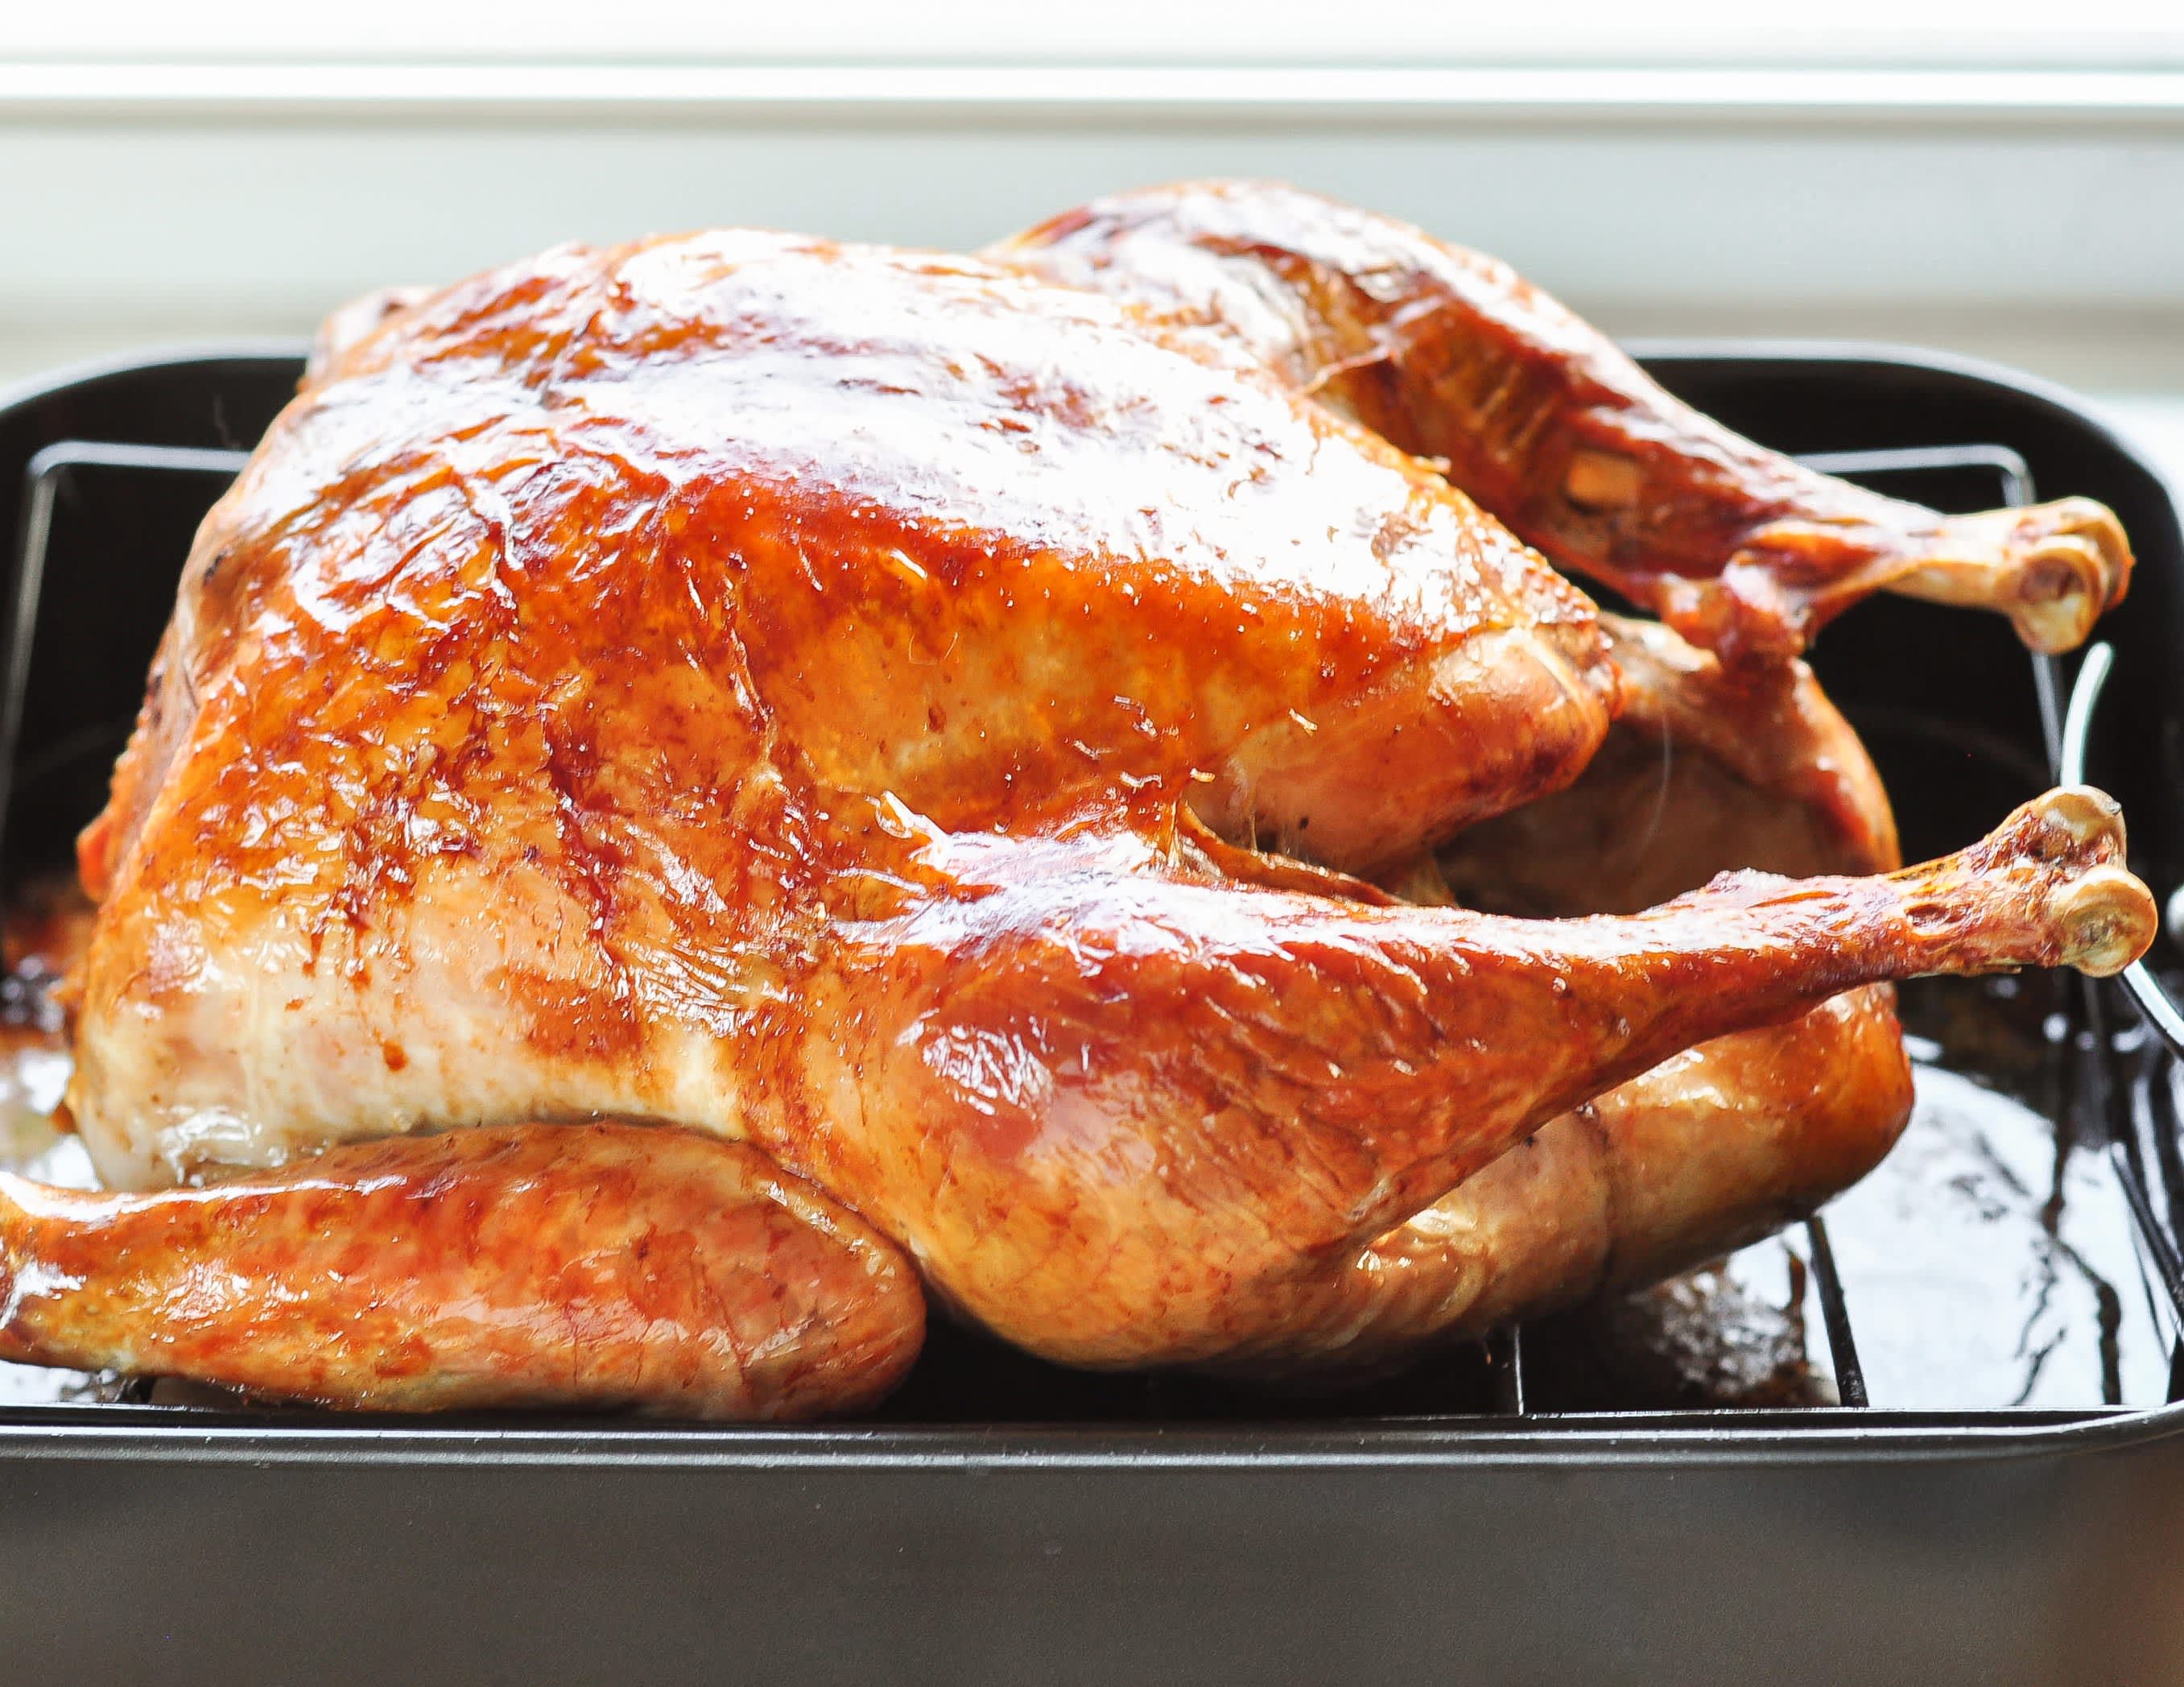 How To Cook a Turkey: The Simplest, Easiest Method | Kitchn